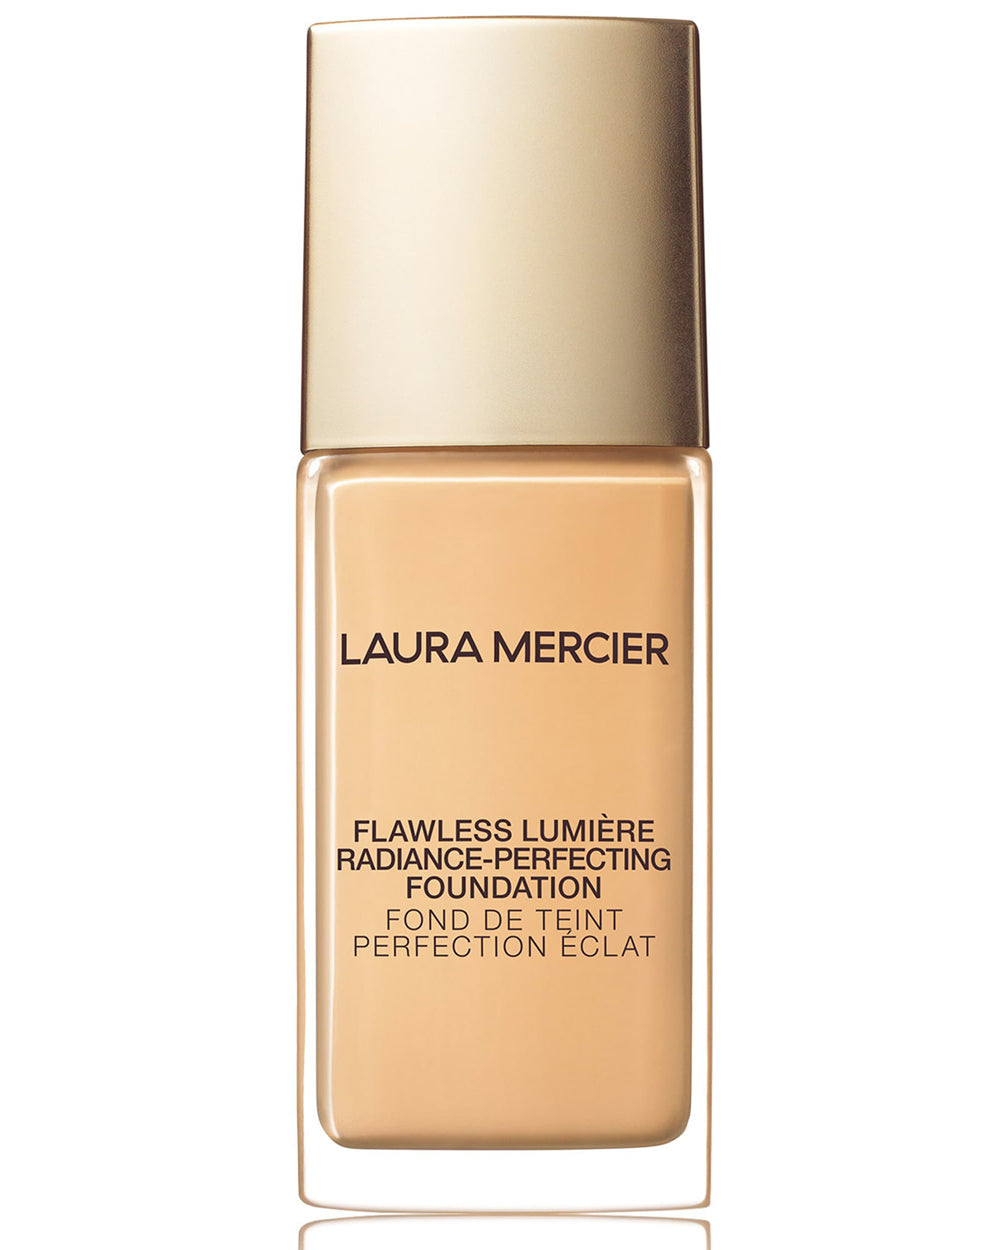 Flawless Lumiere Foundation in 1W1 Ivory